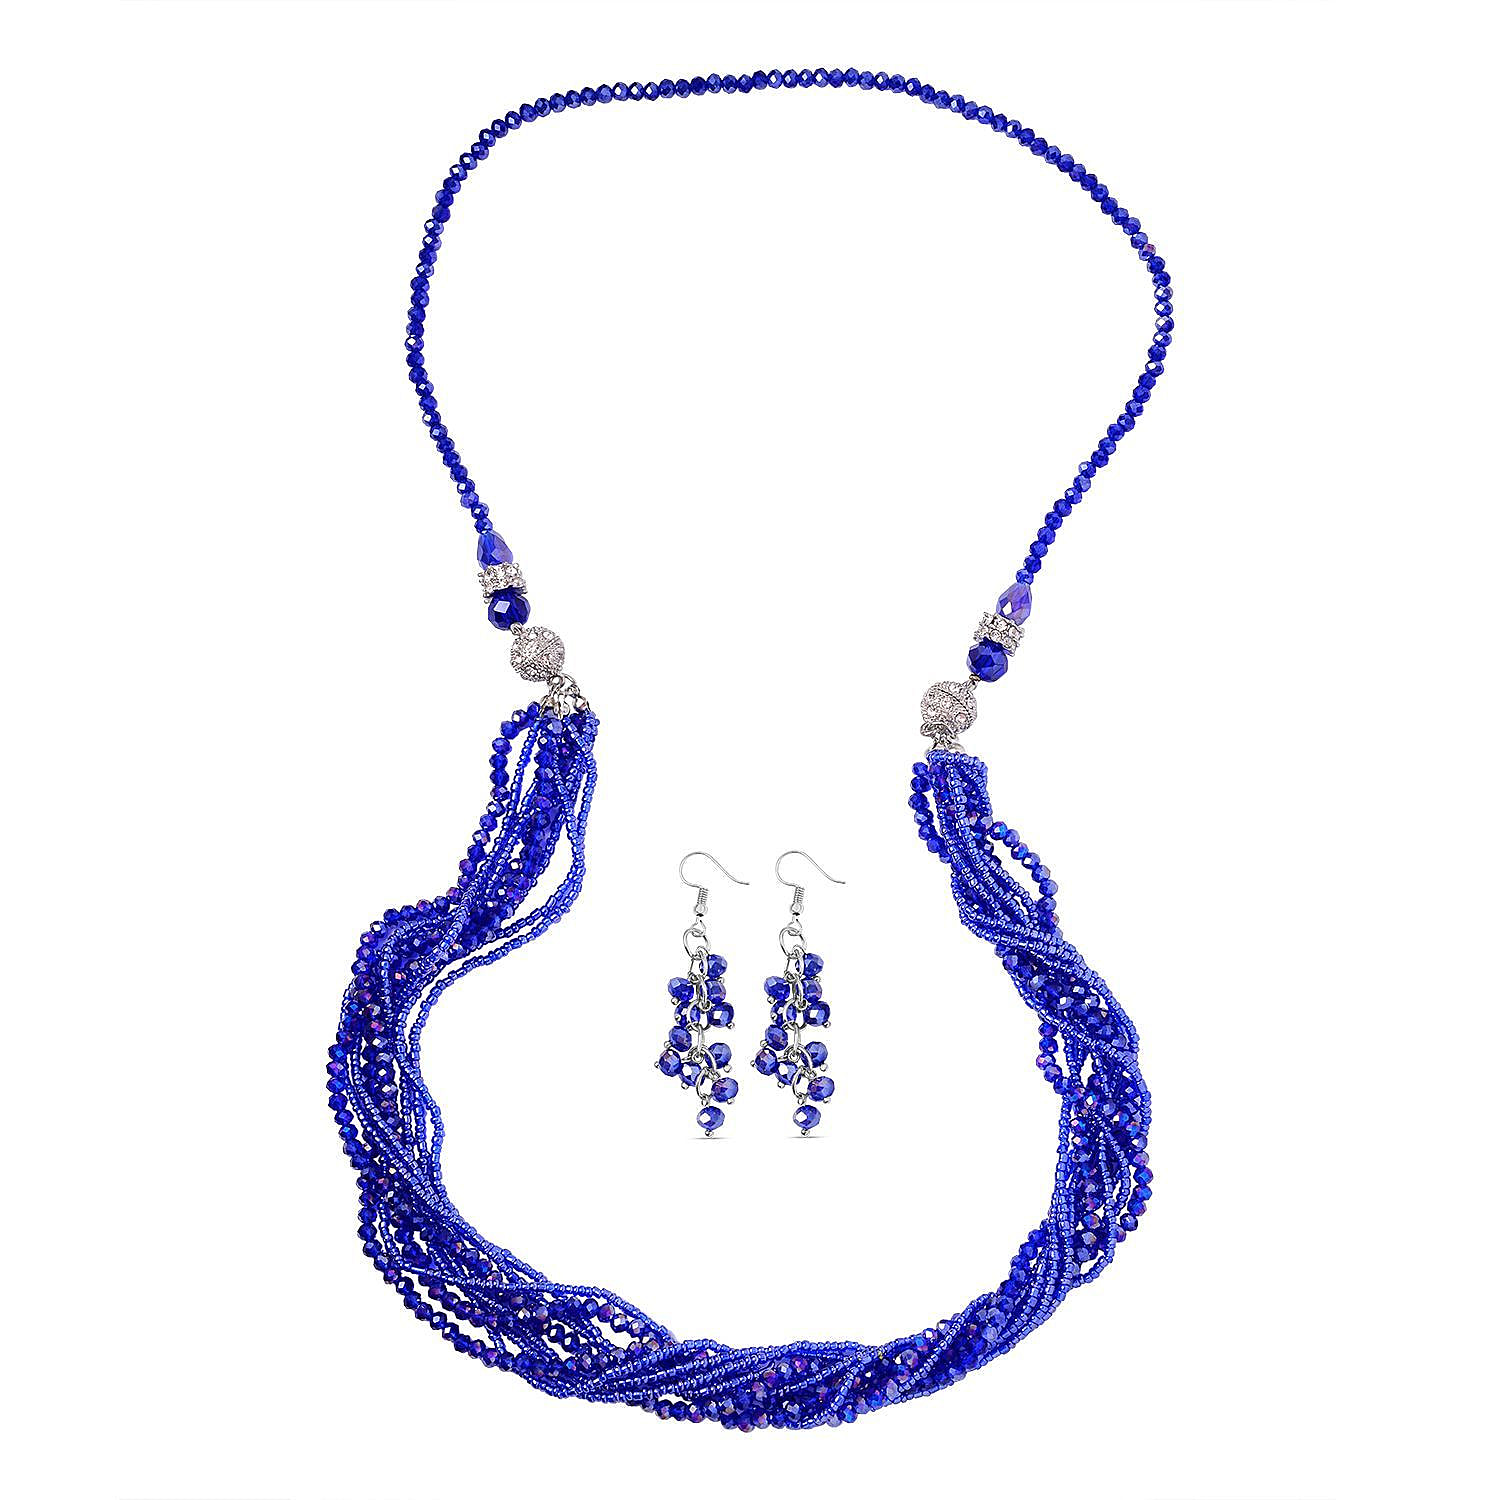 3 Piece Set - White & Blue Austrian Crystal Necklace (Size 18 & 16) and Earrings